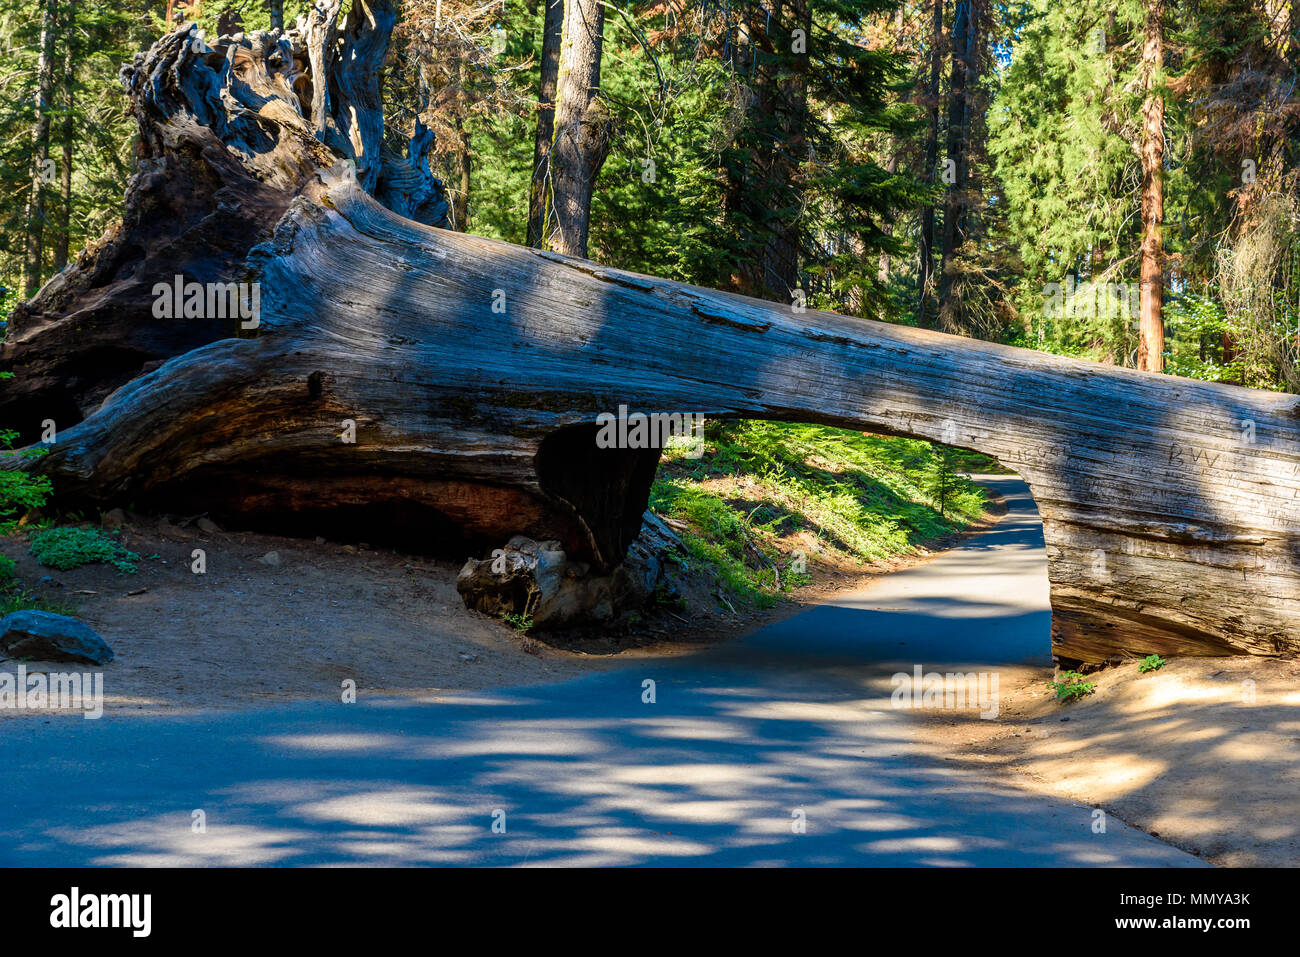 Tunnel Log in Sequoia National Park. Tunnel 8 ft high, 17 ft wide.  California, United States. Stock Photo